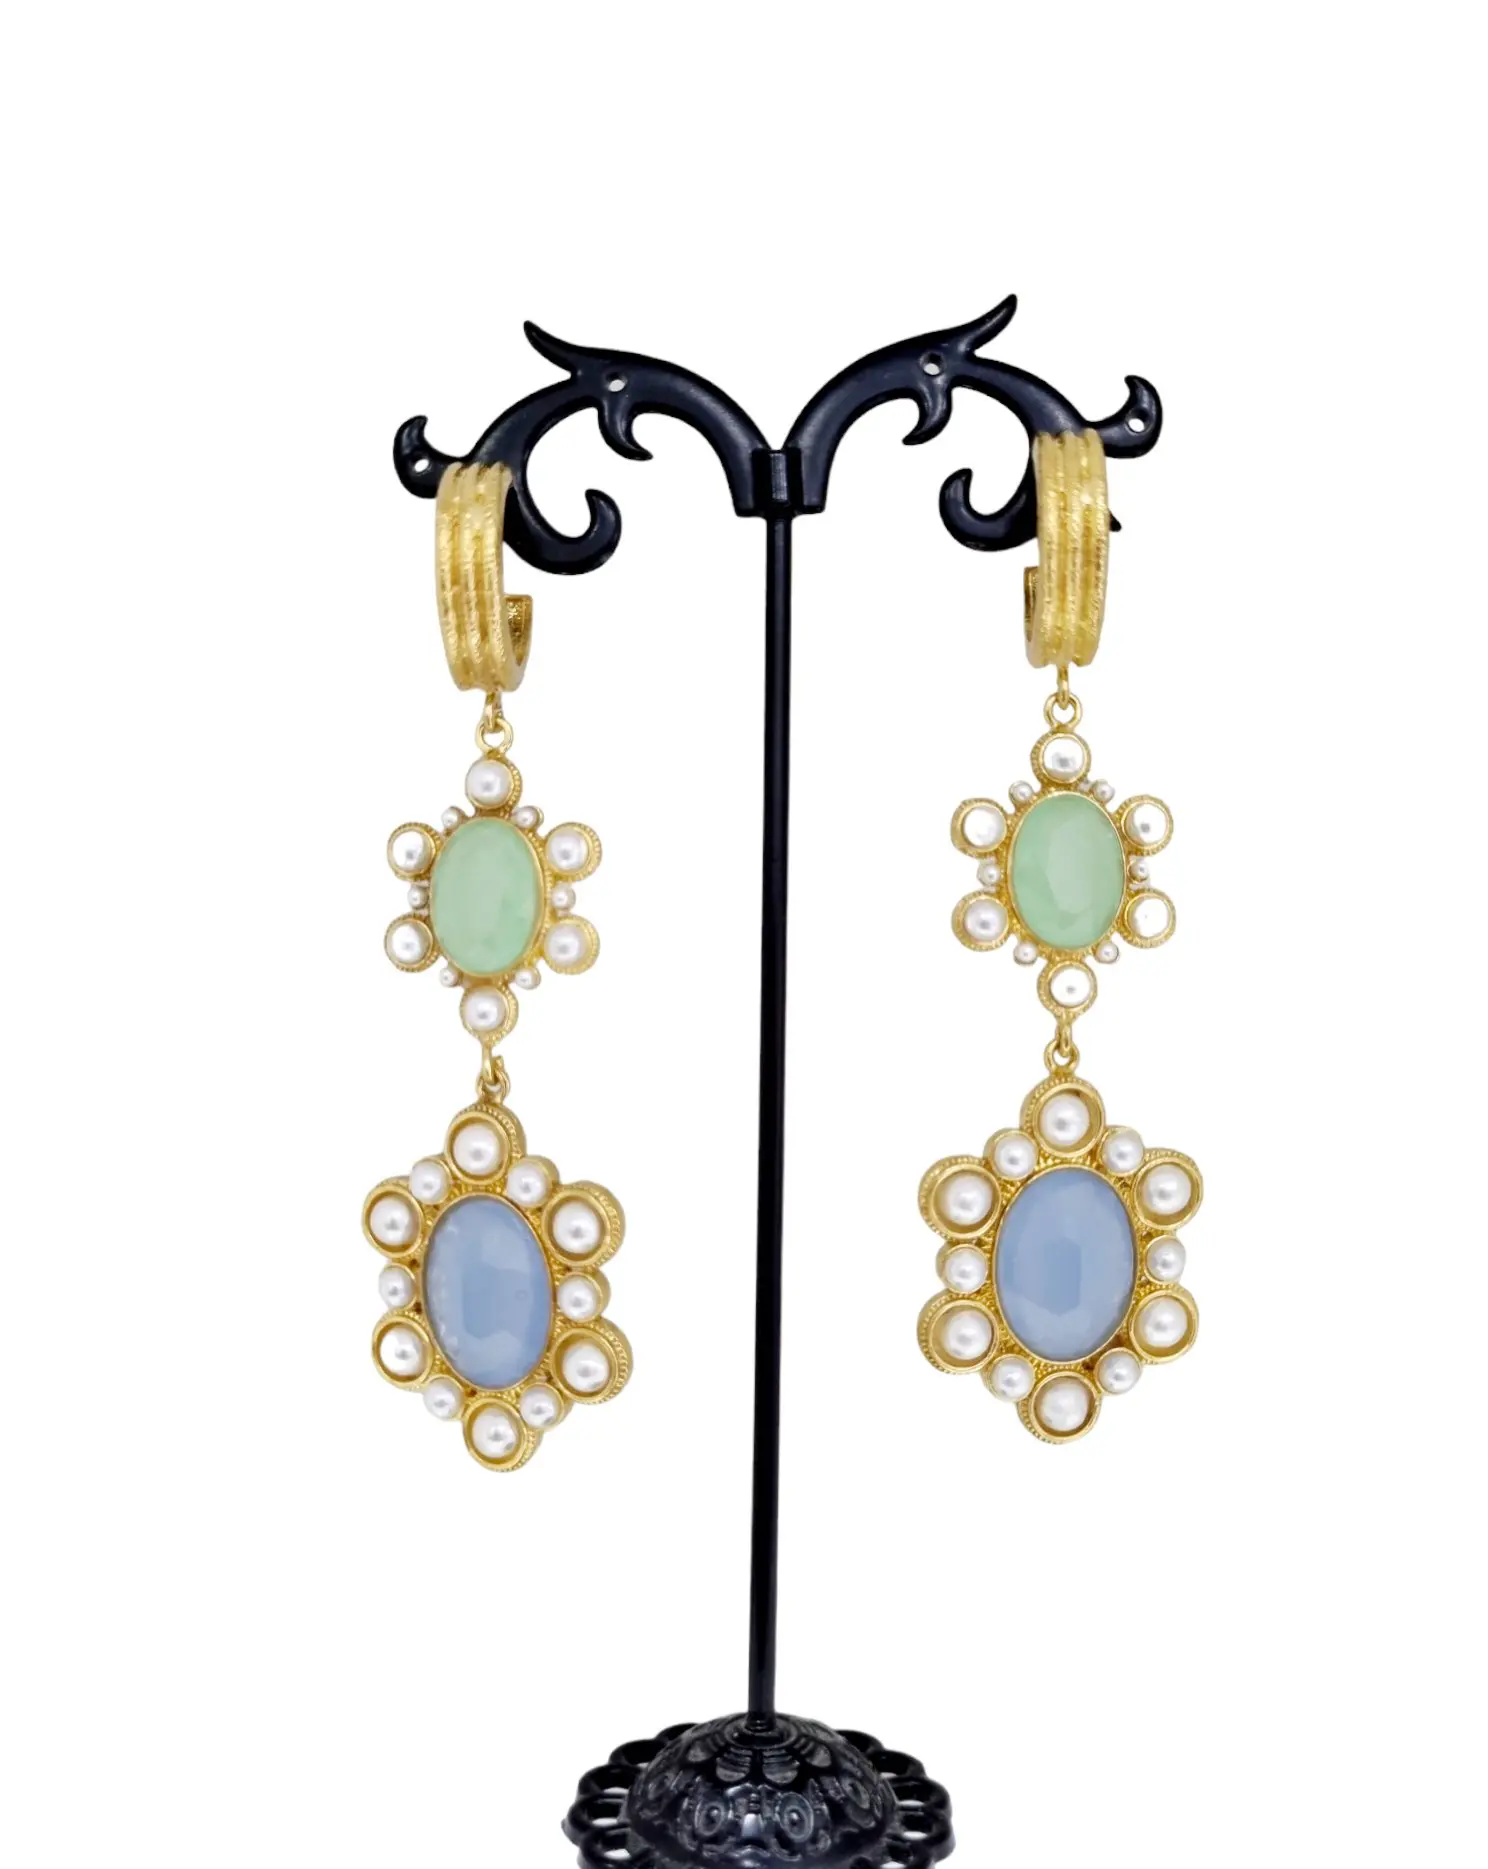 Earrings made with pastel natural stones set in brass. Length 9cm Weight 16.8